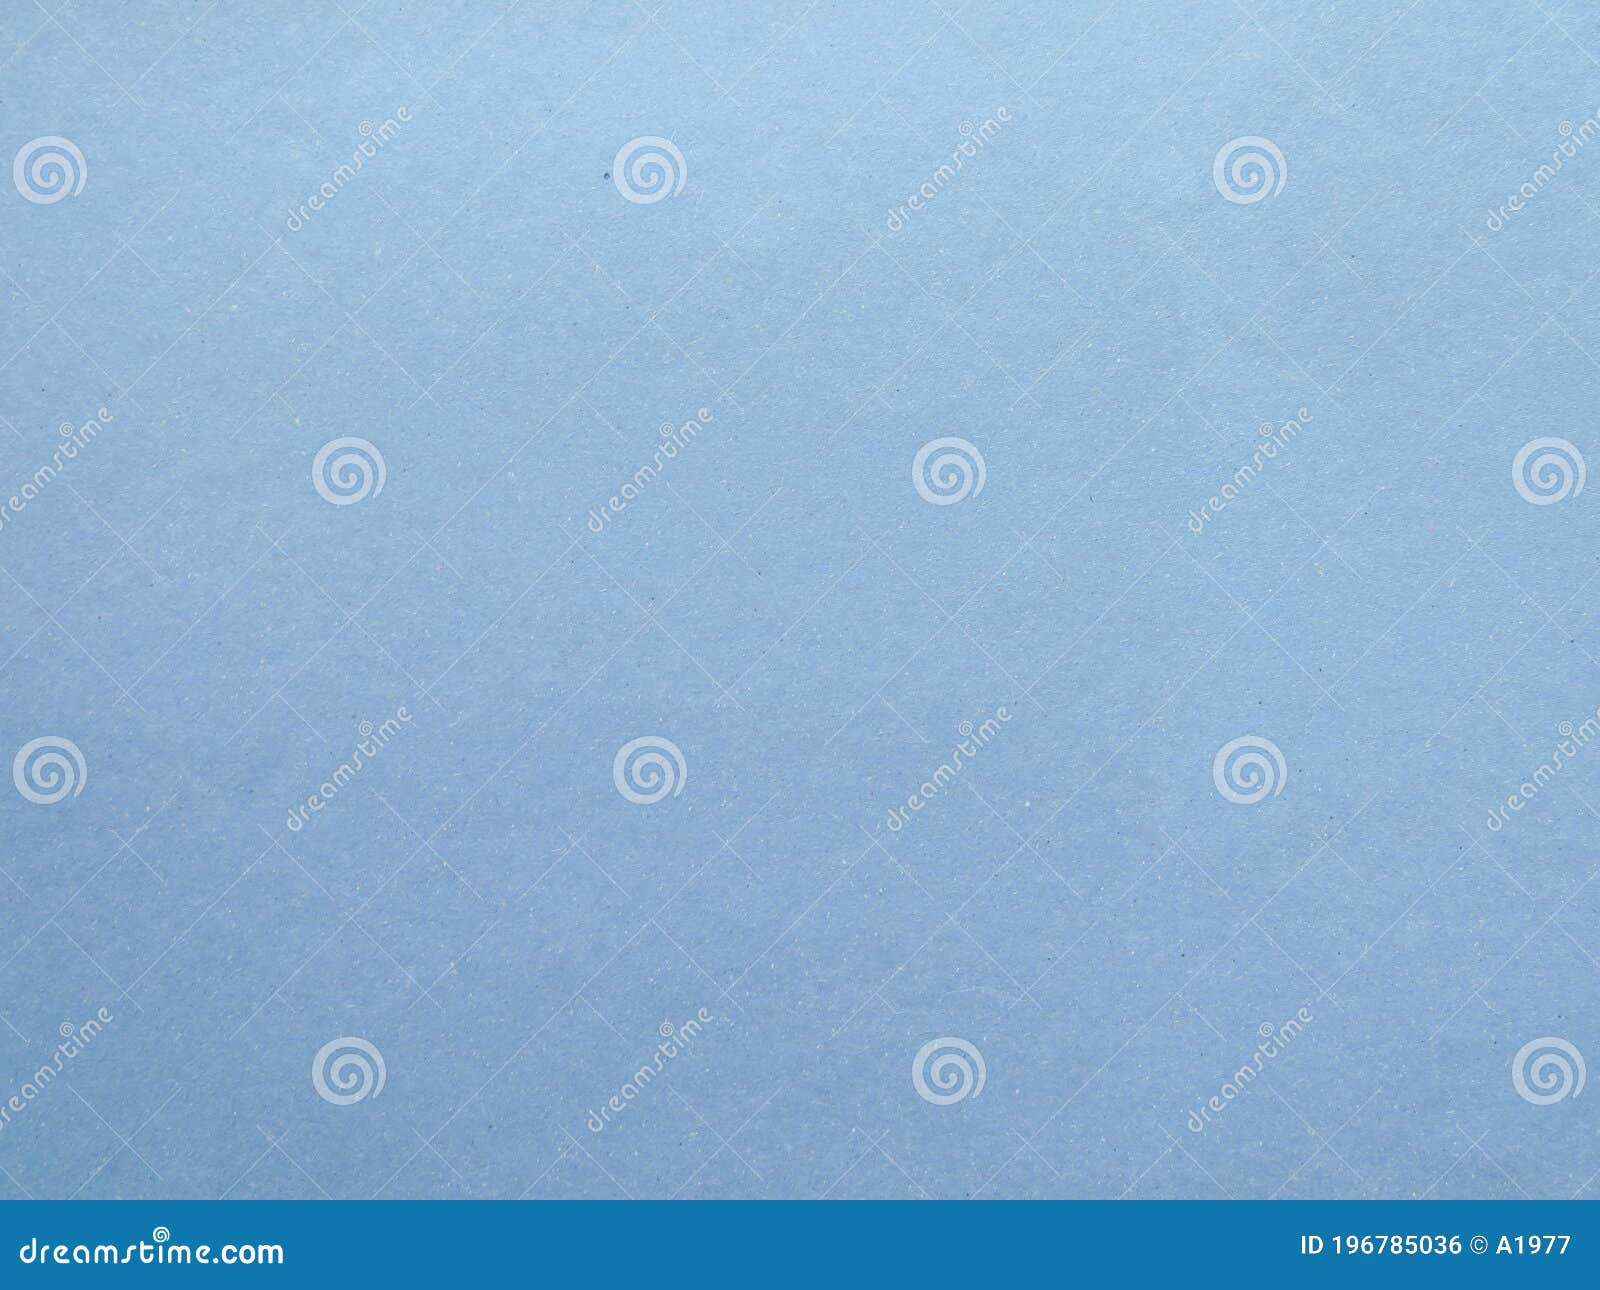 Light Blue Paperboard Texture Background Stock Photo - Image of light ...